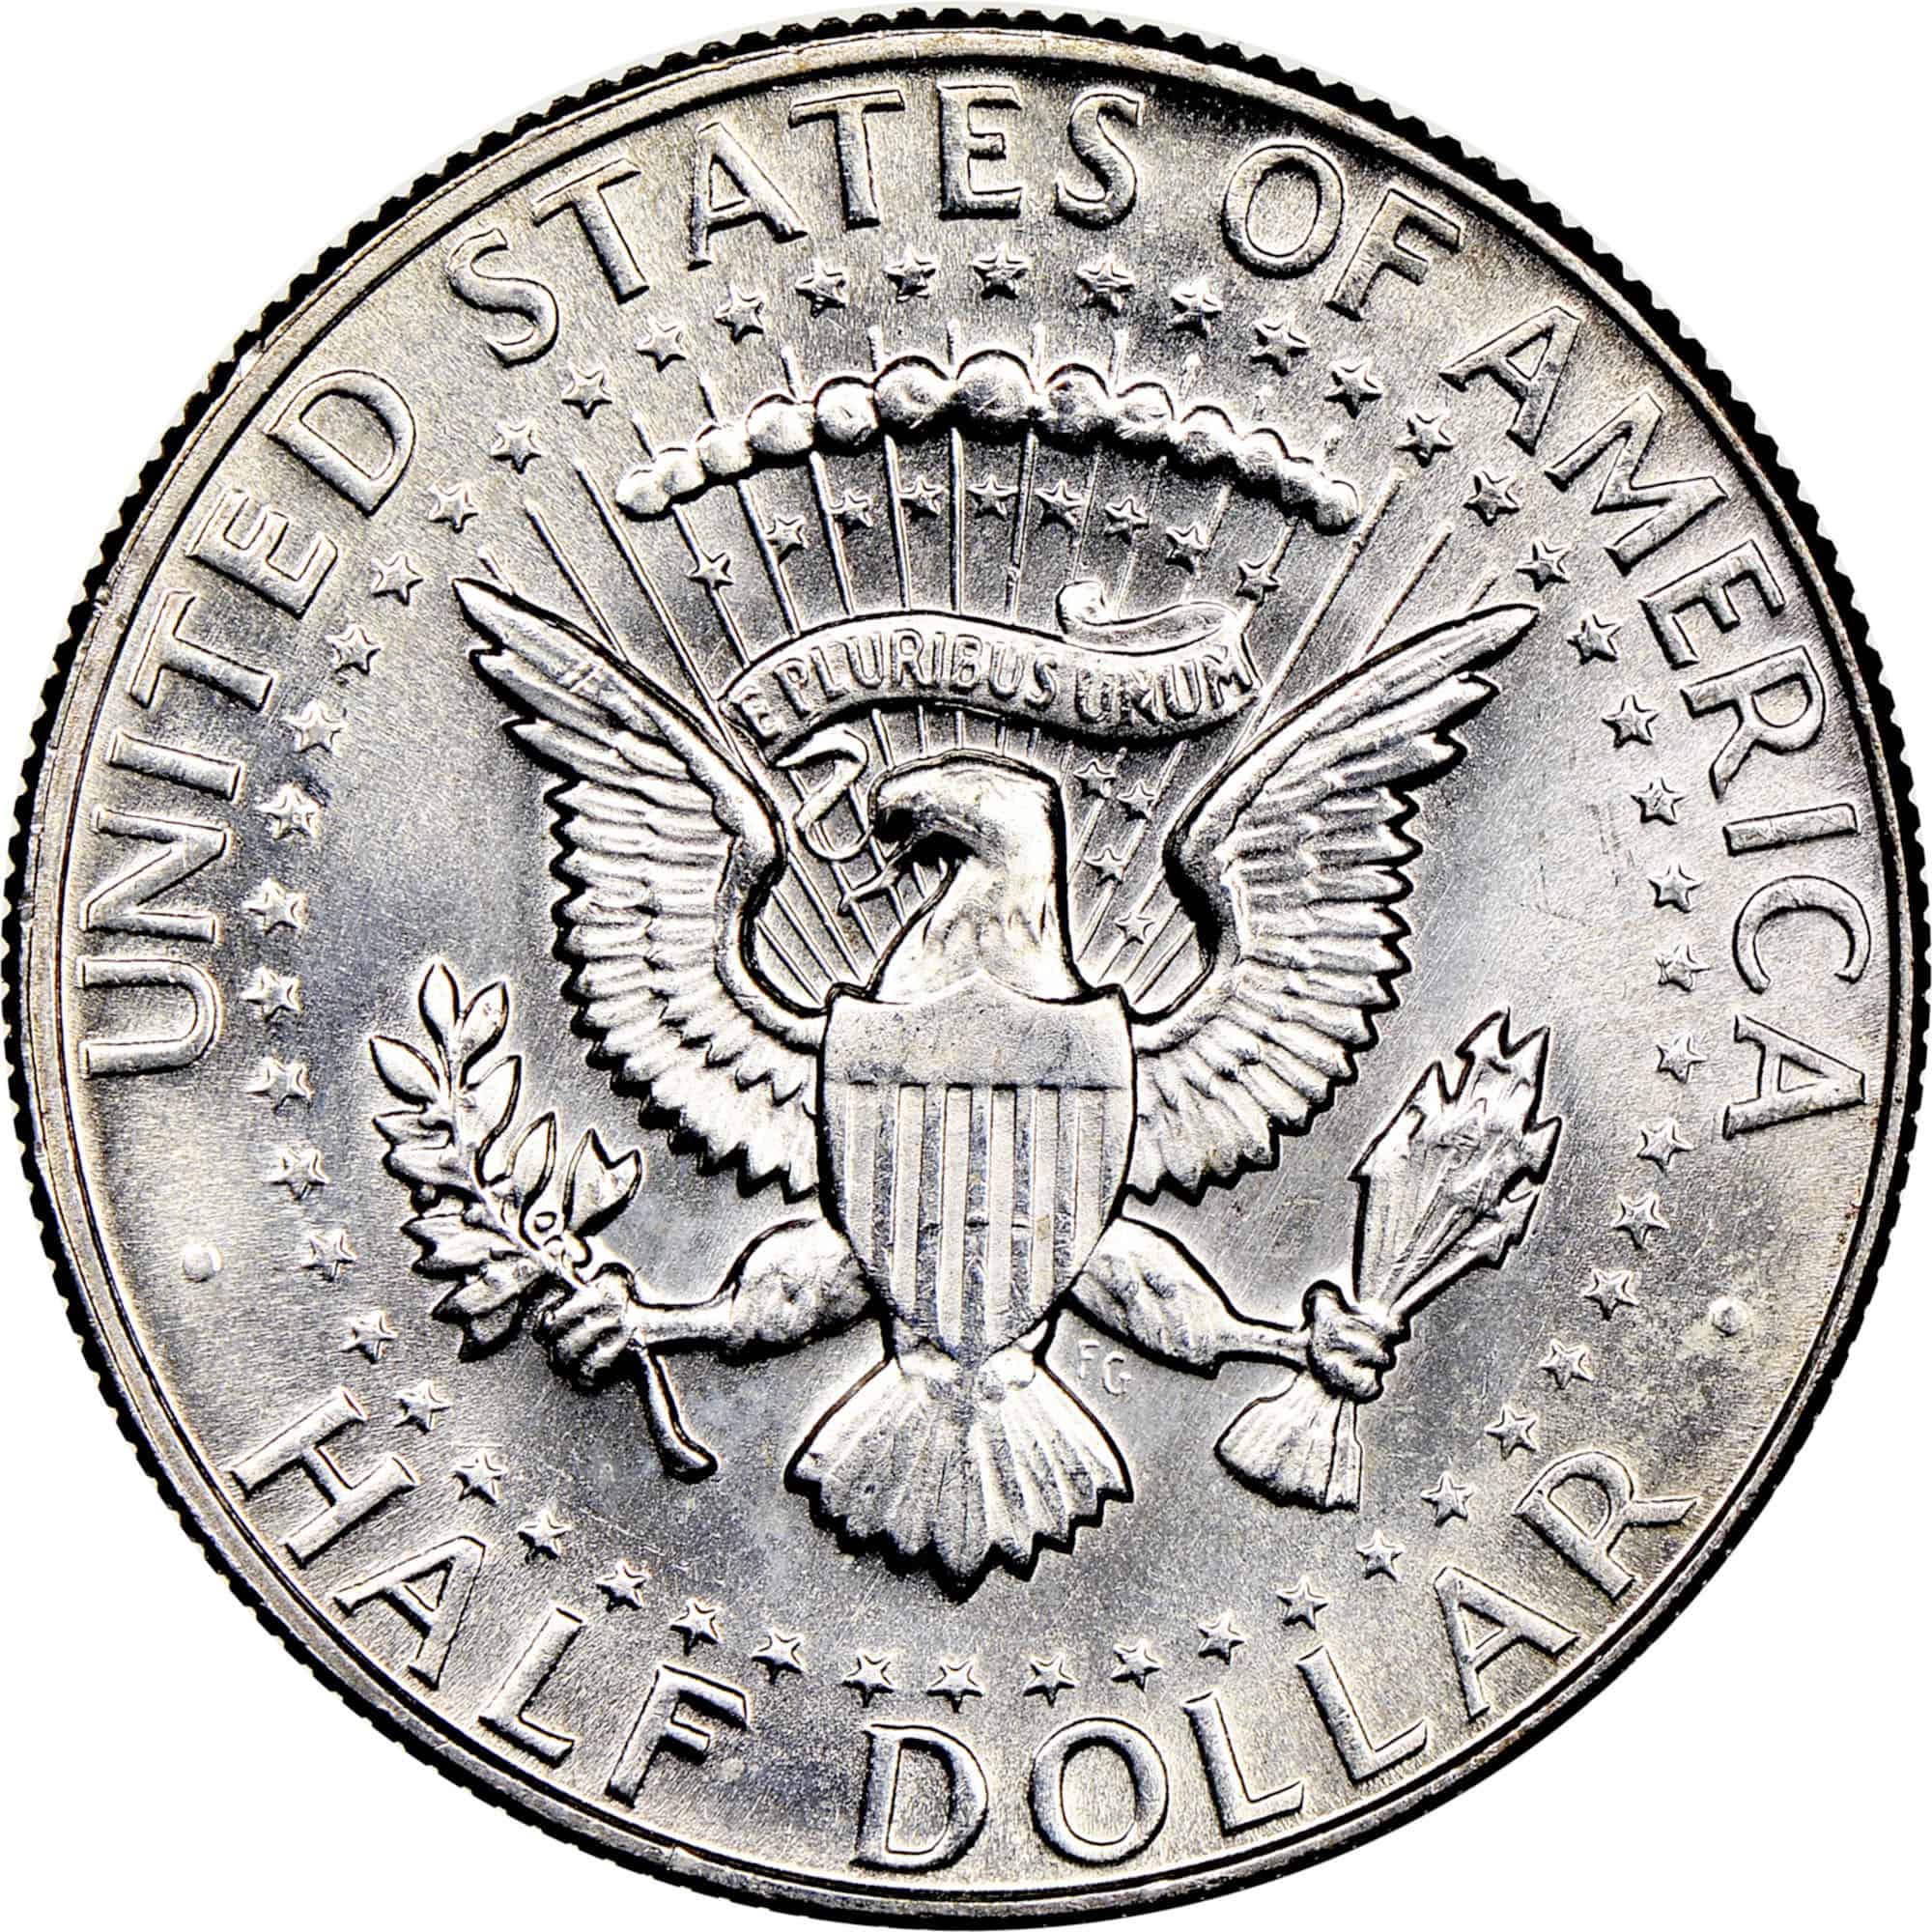 The Reverse of the 1967 Half Dollar